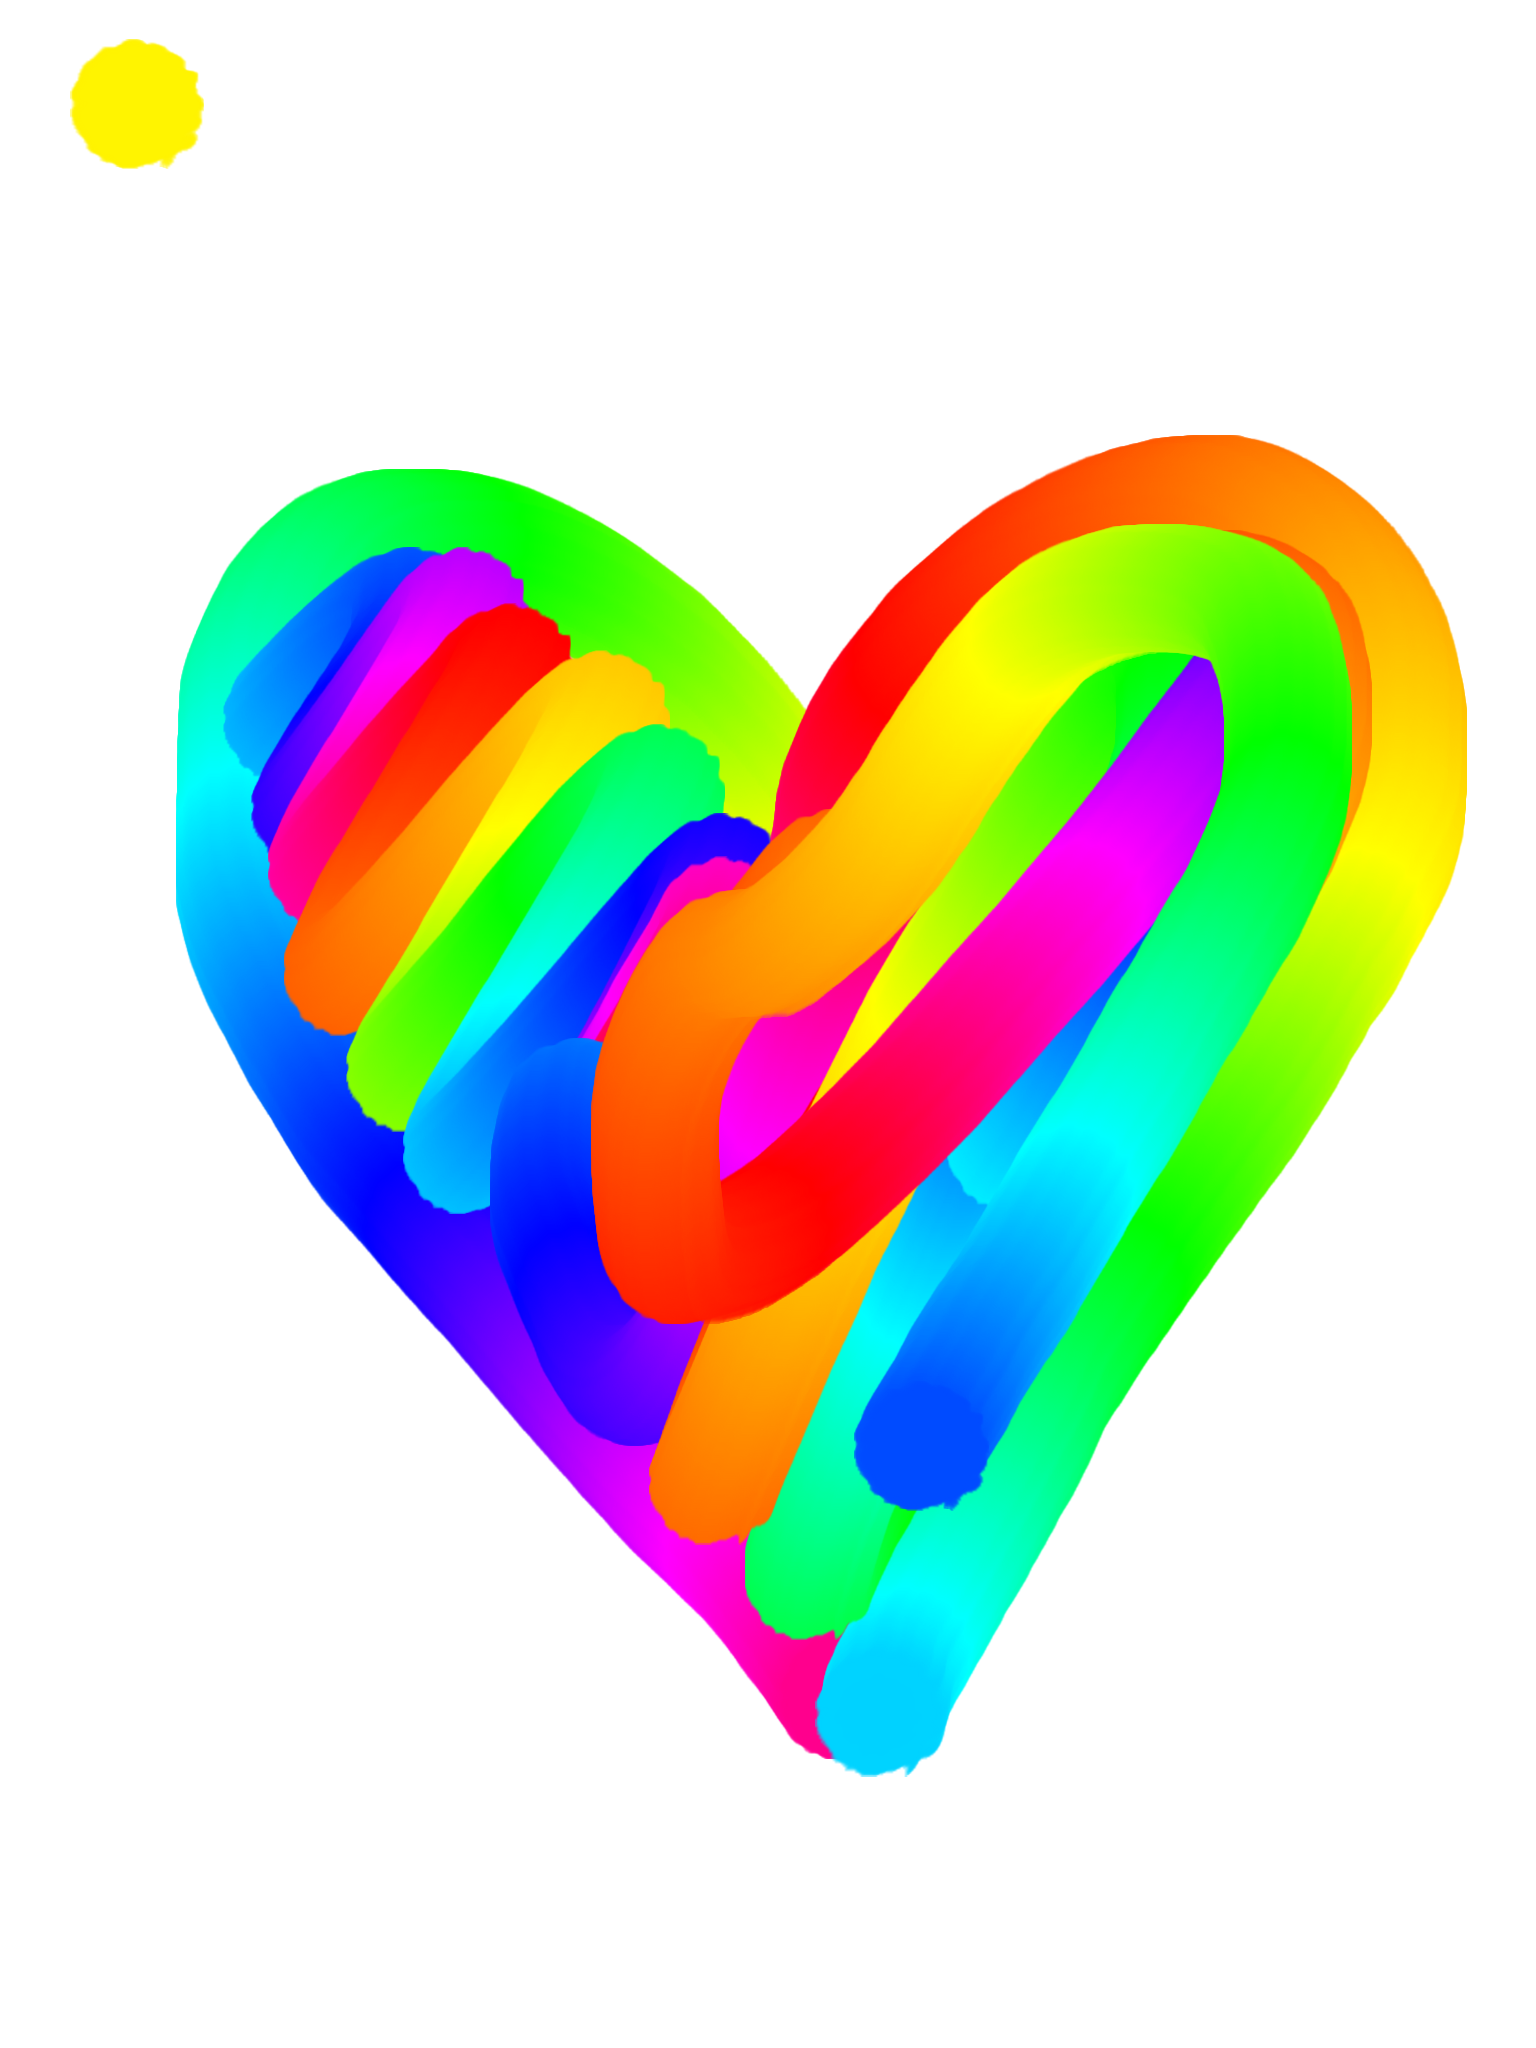 Rainbow Heart | Inspired by Matisse